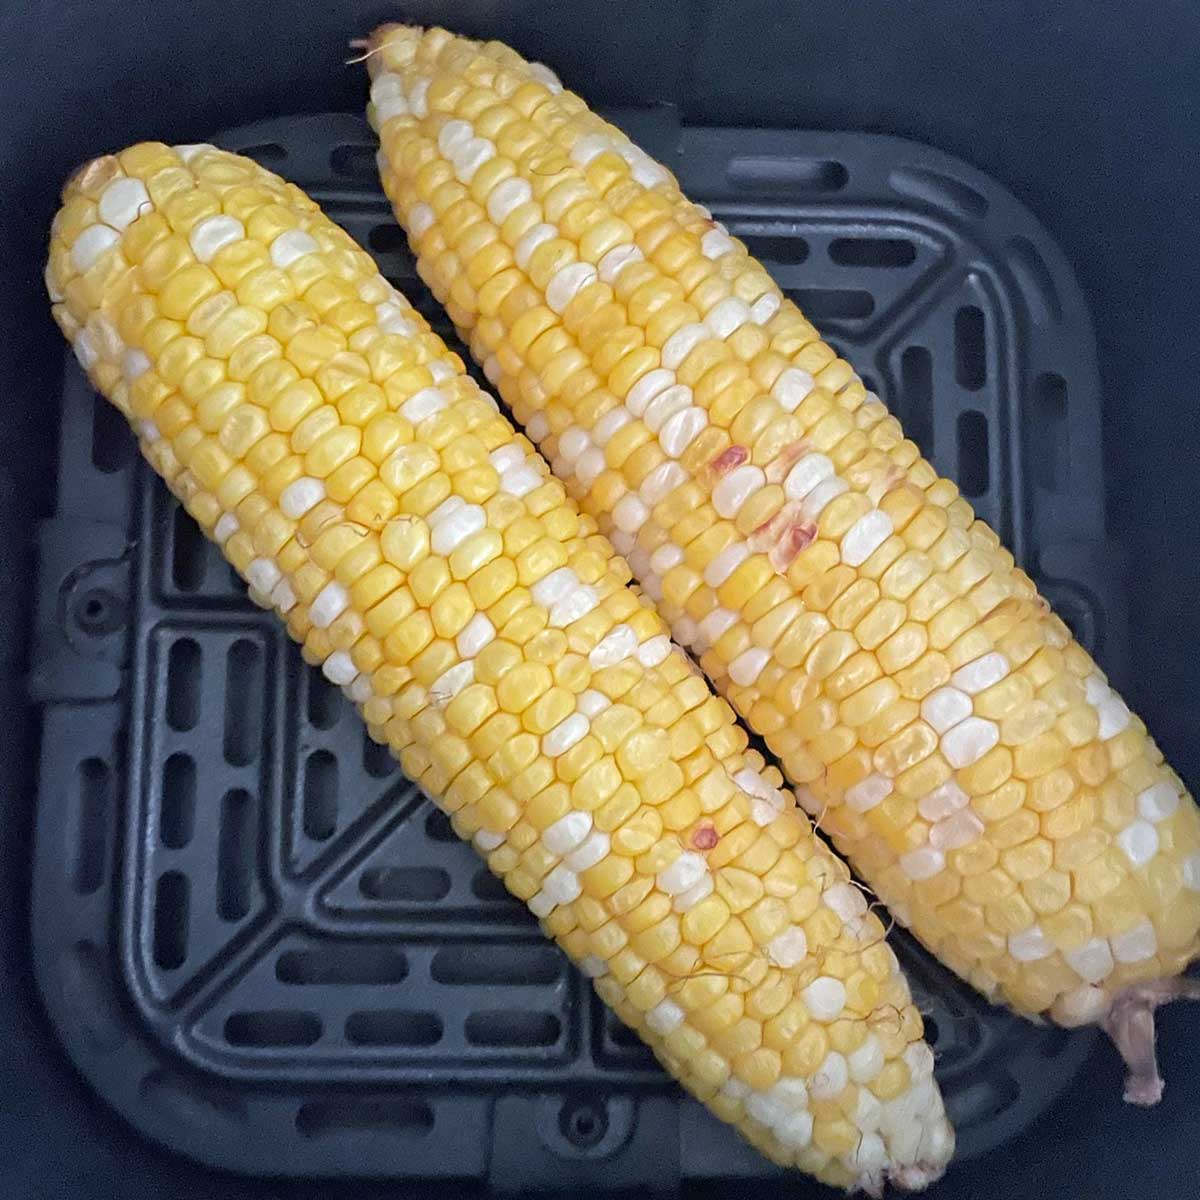 Cooked corn on the cob in air fryer.